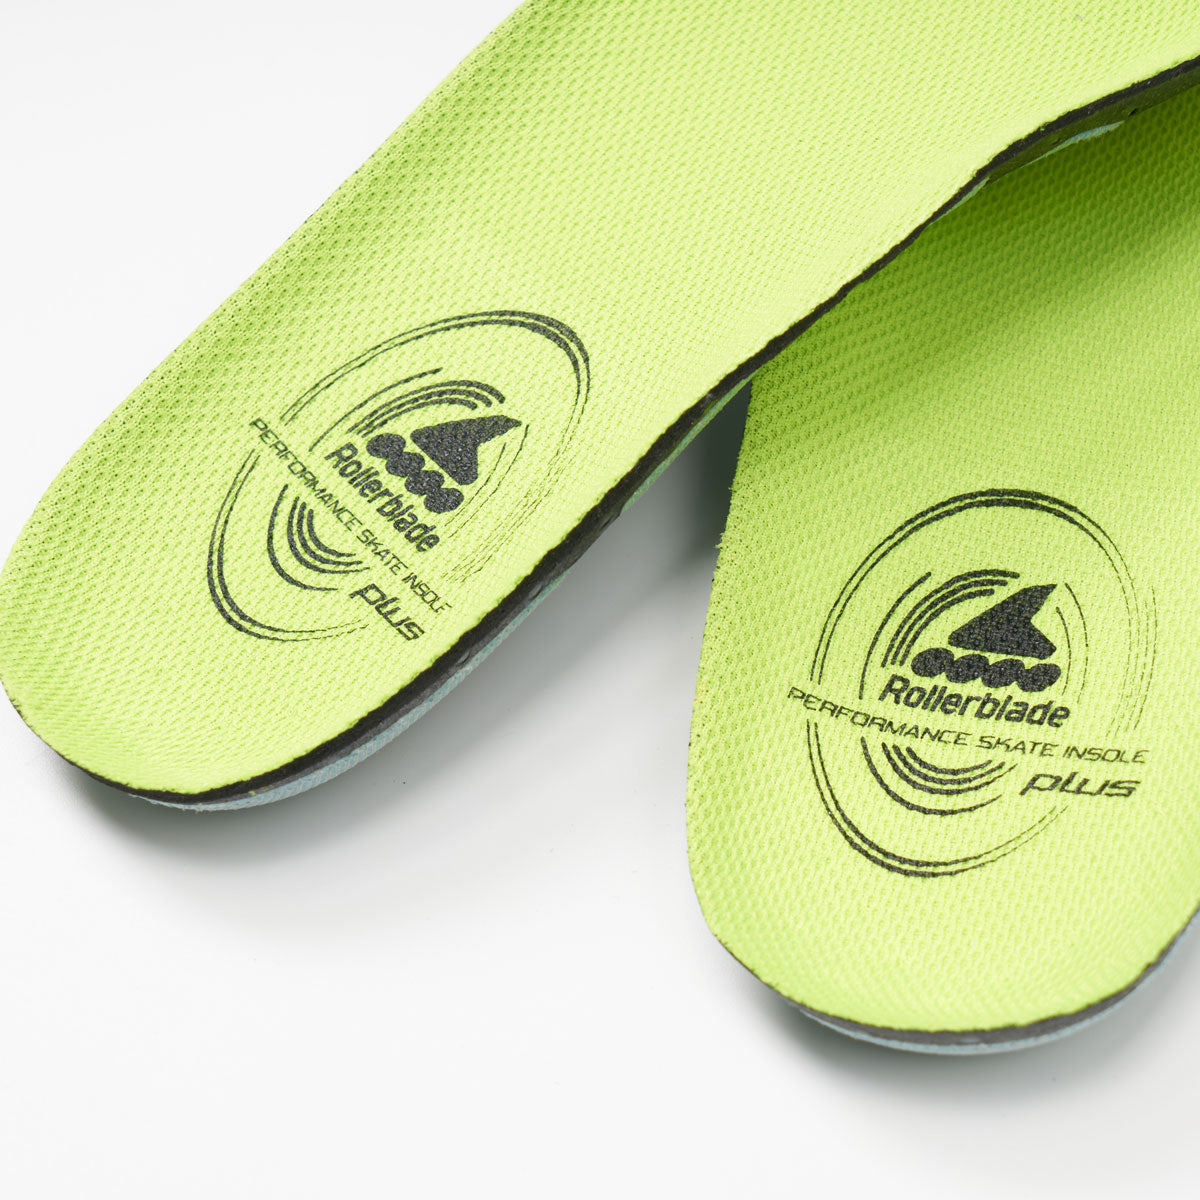 Rollerblade Performance Skate Insole - Plus